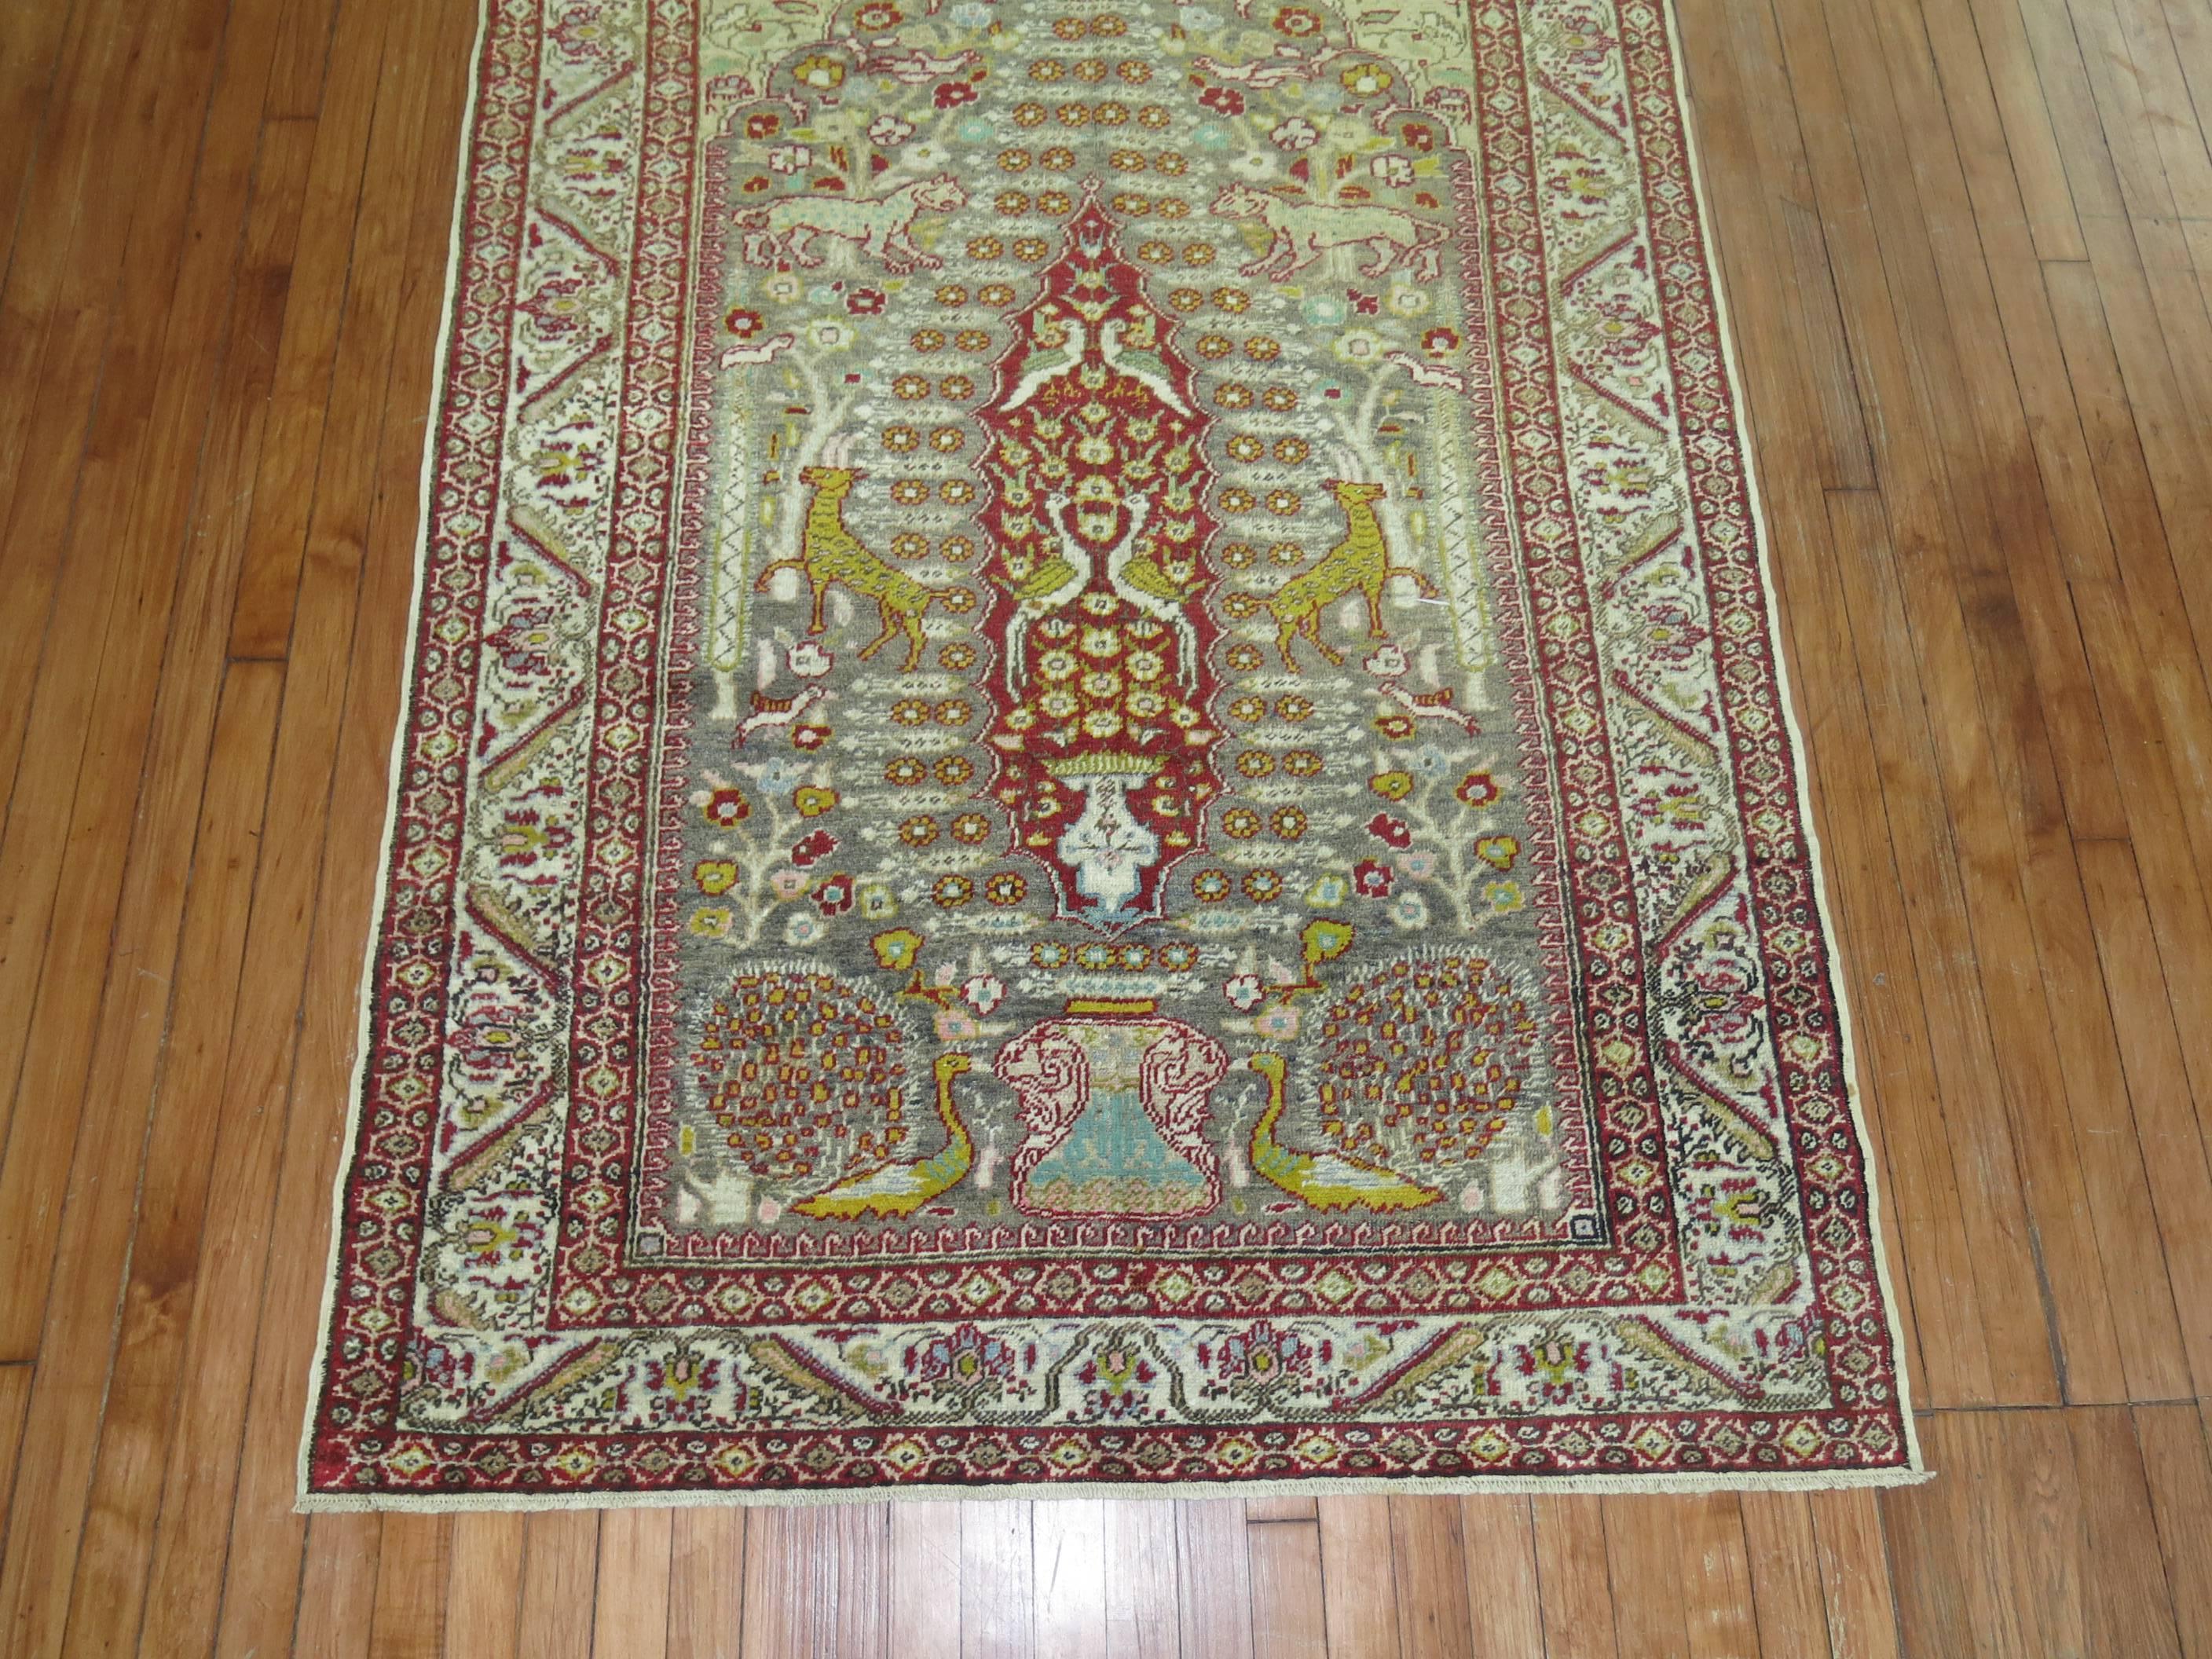 Interesting Turkish rug we purchased depicting different animal figures on a silver colored field.

4'4'' x 7'

Sivas carpets tend to be short cropped copies of Persian carpets. The weavers of Sivas area were predominantly Muslim women. Trade in